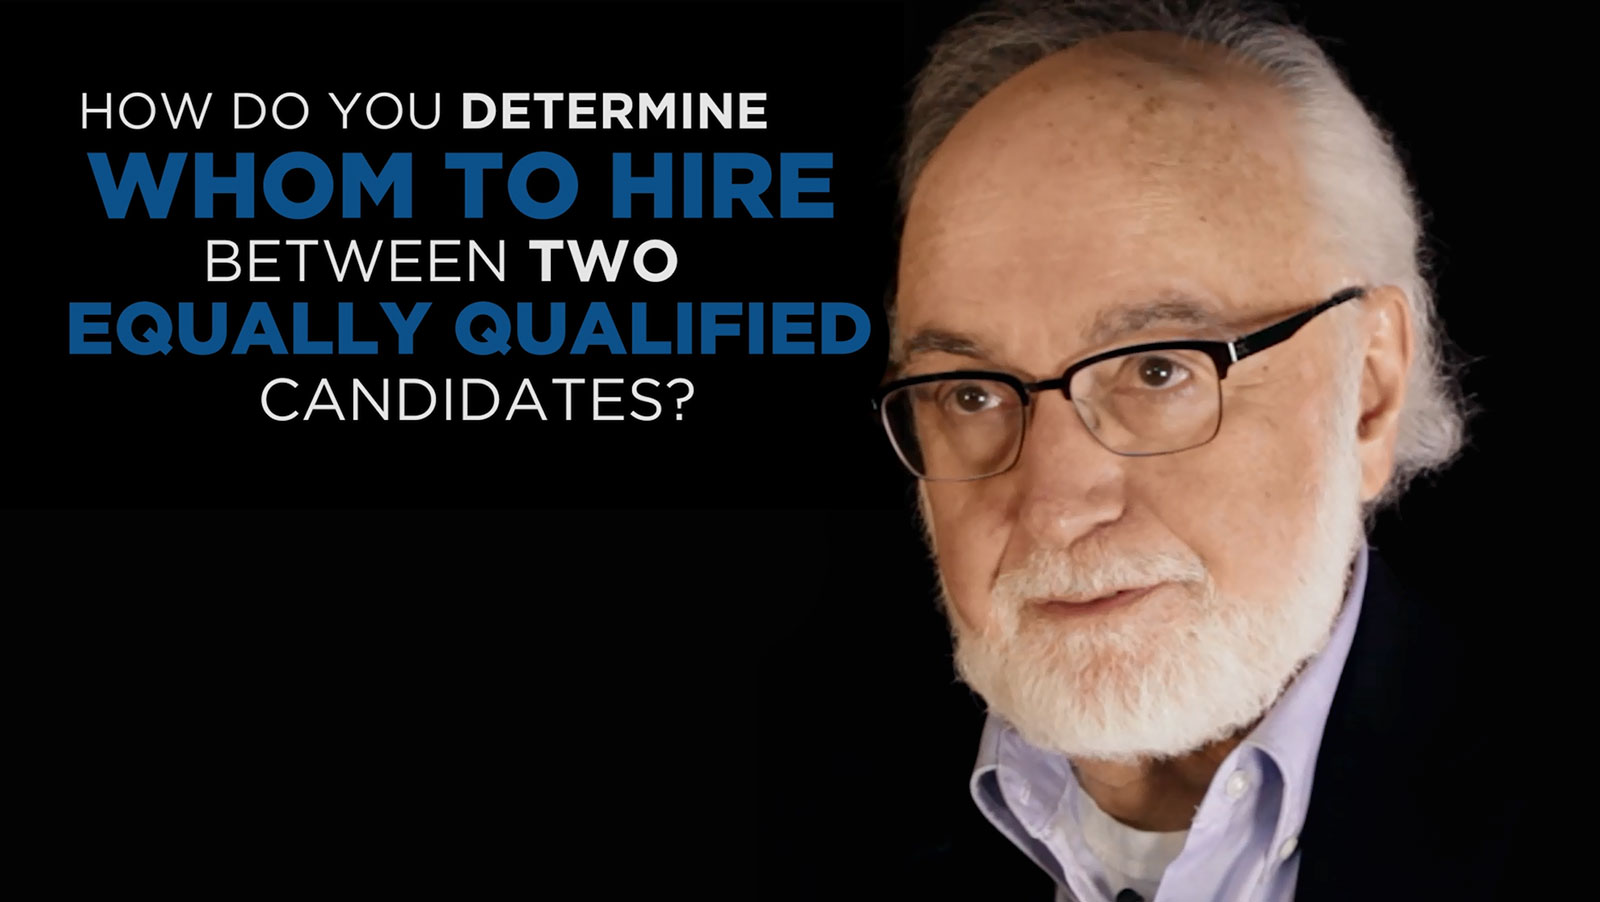 Shared Experience – How do you determine whom to hire between two equally qualified candidates?